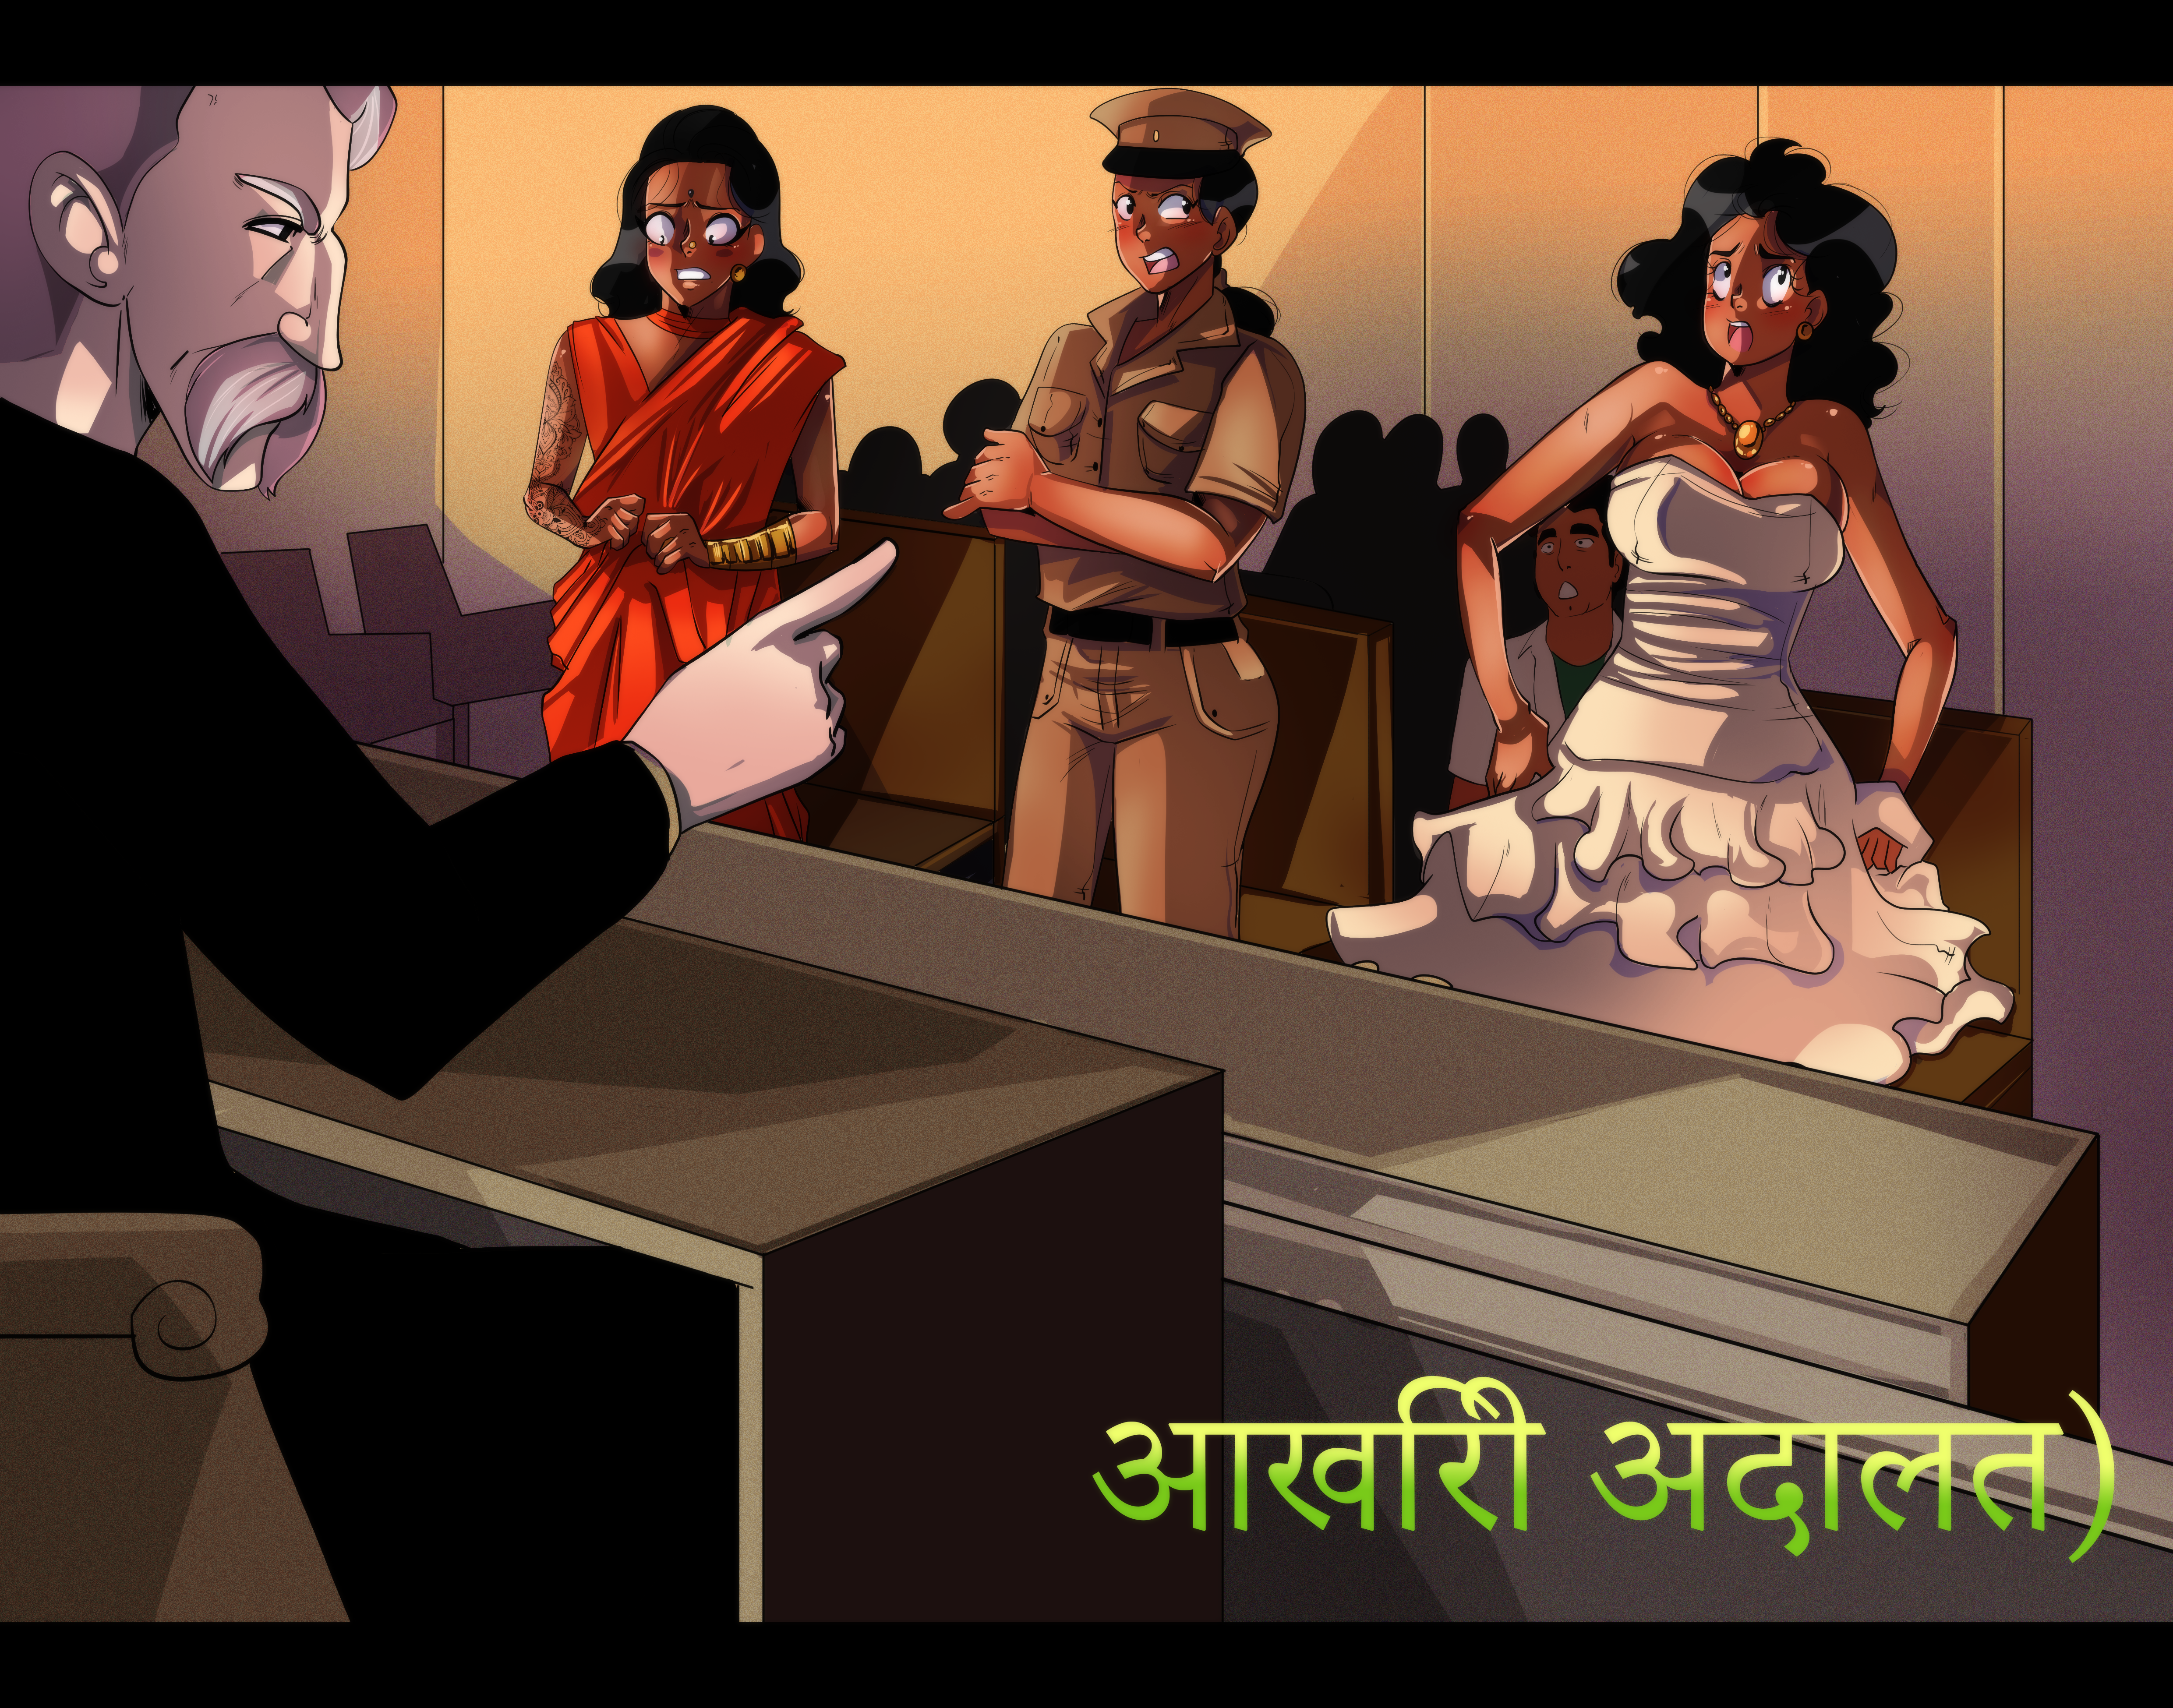 Illustration for Aakhri Adaalat done by Lucy Fidelis